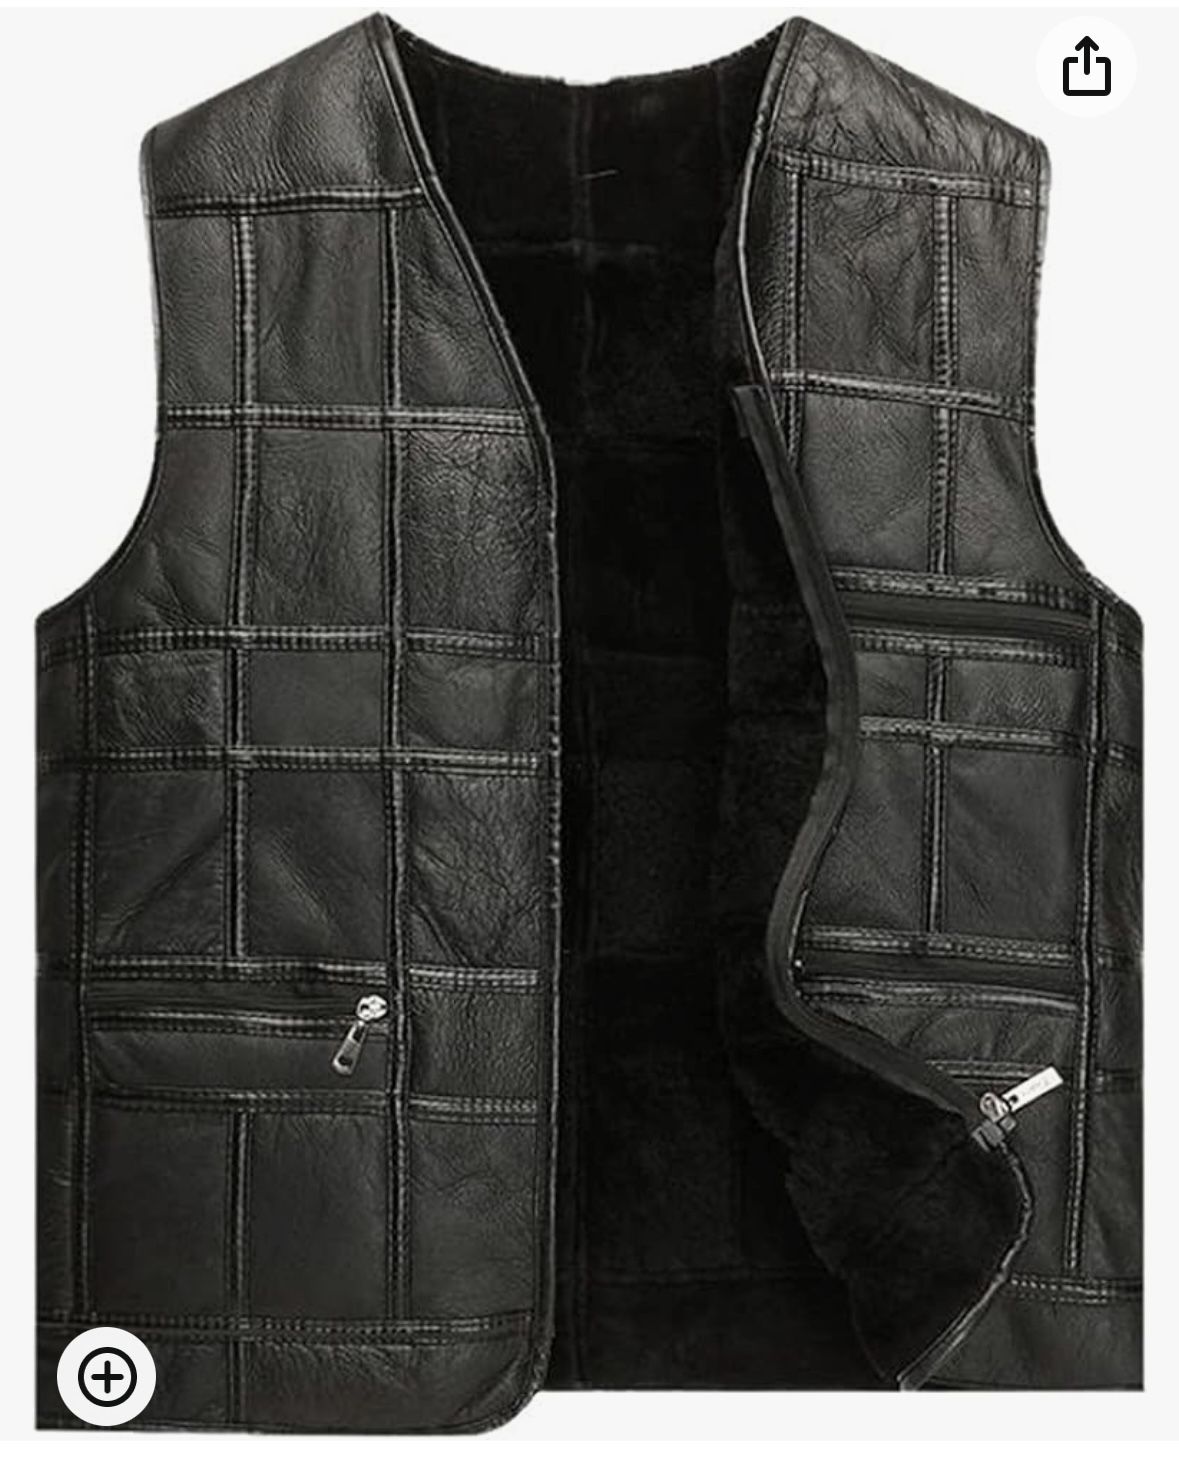 Sheepskin Leather shearling Motorcycle Vest For Men, Black  Leather with  Pockets. Size L  